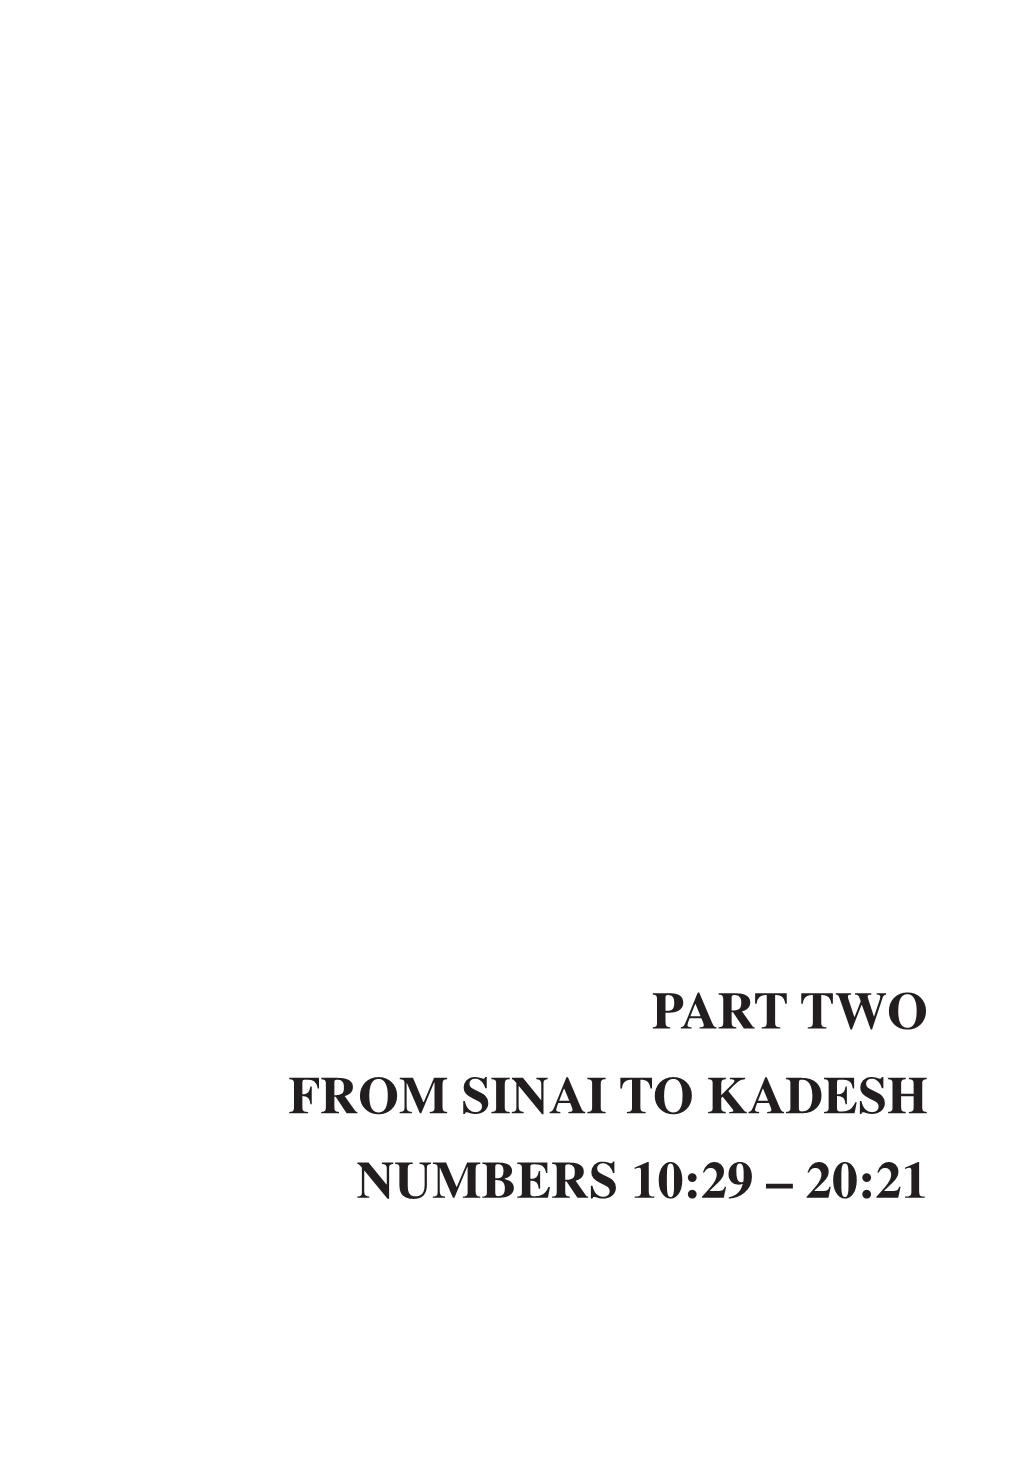 Part Two from Sinai to Kadesh Numbers 10:29 – 20:21